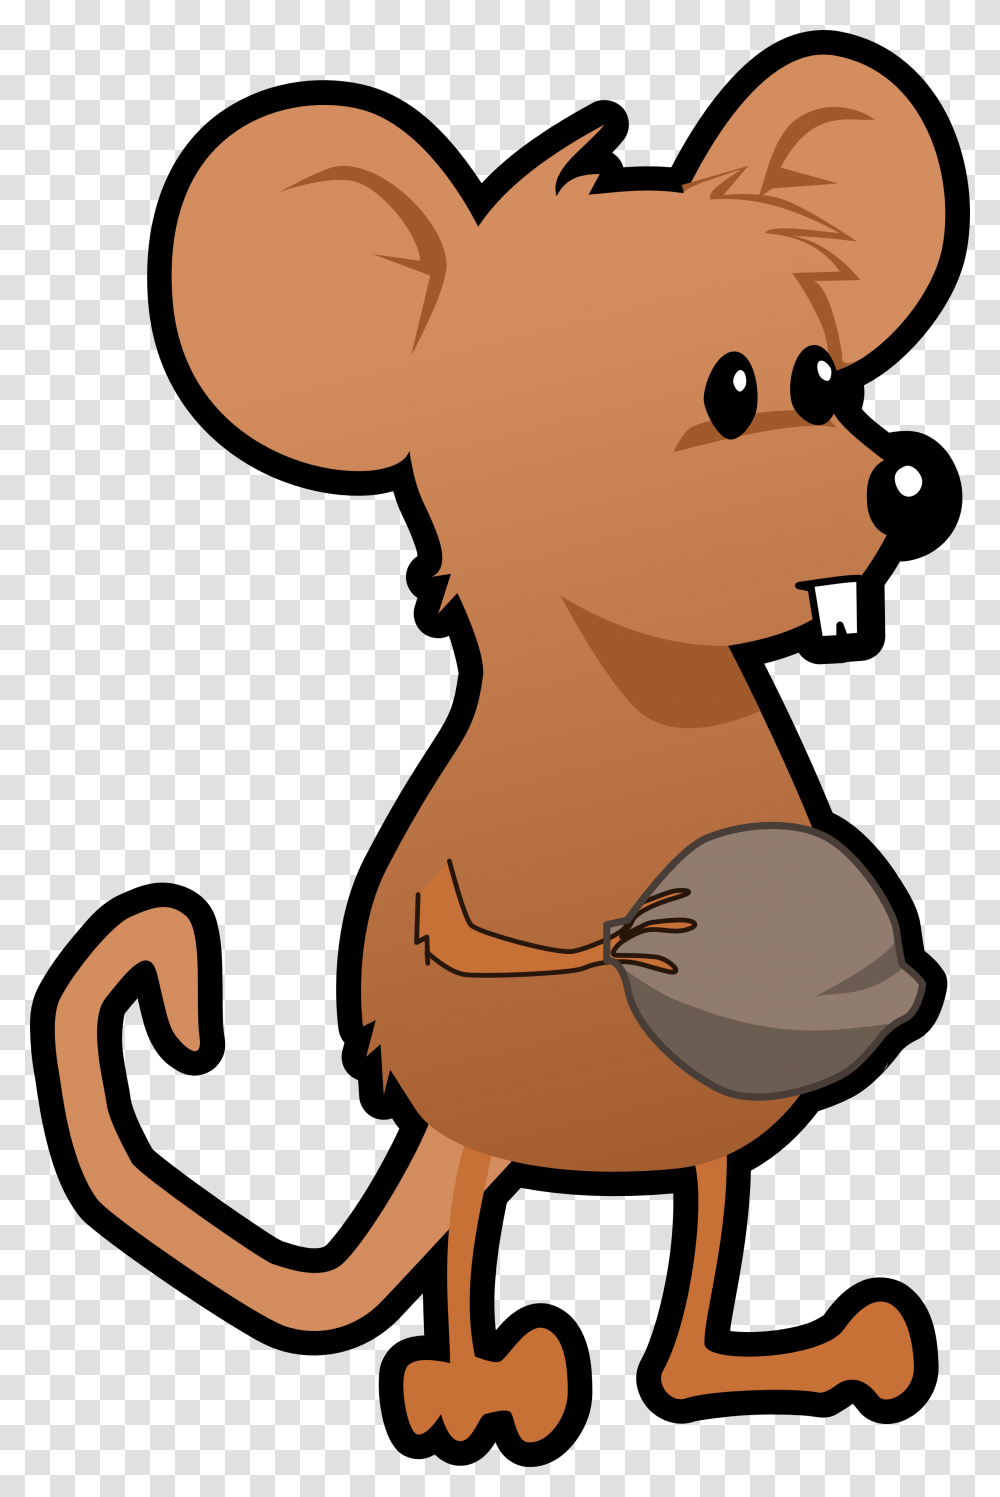 Clip Art Of Mice, Animal, Sunglasses, Accessories, Accessory Transparent Png